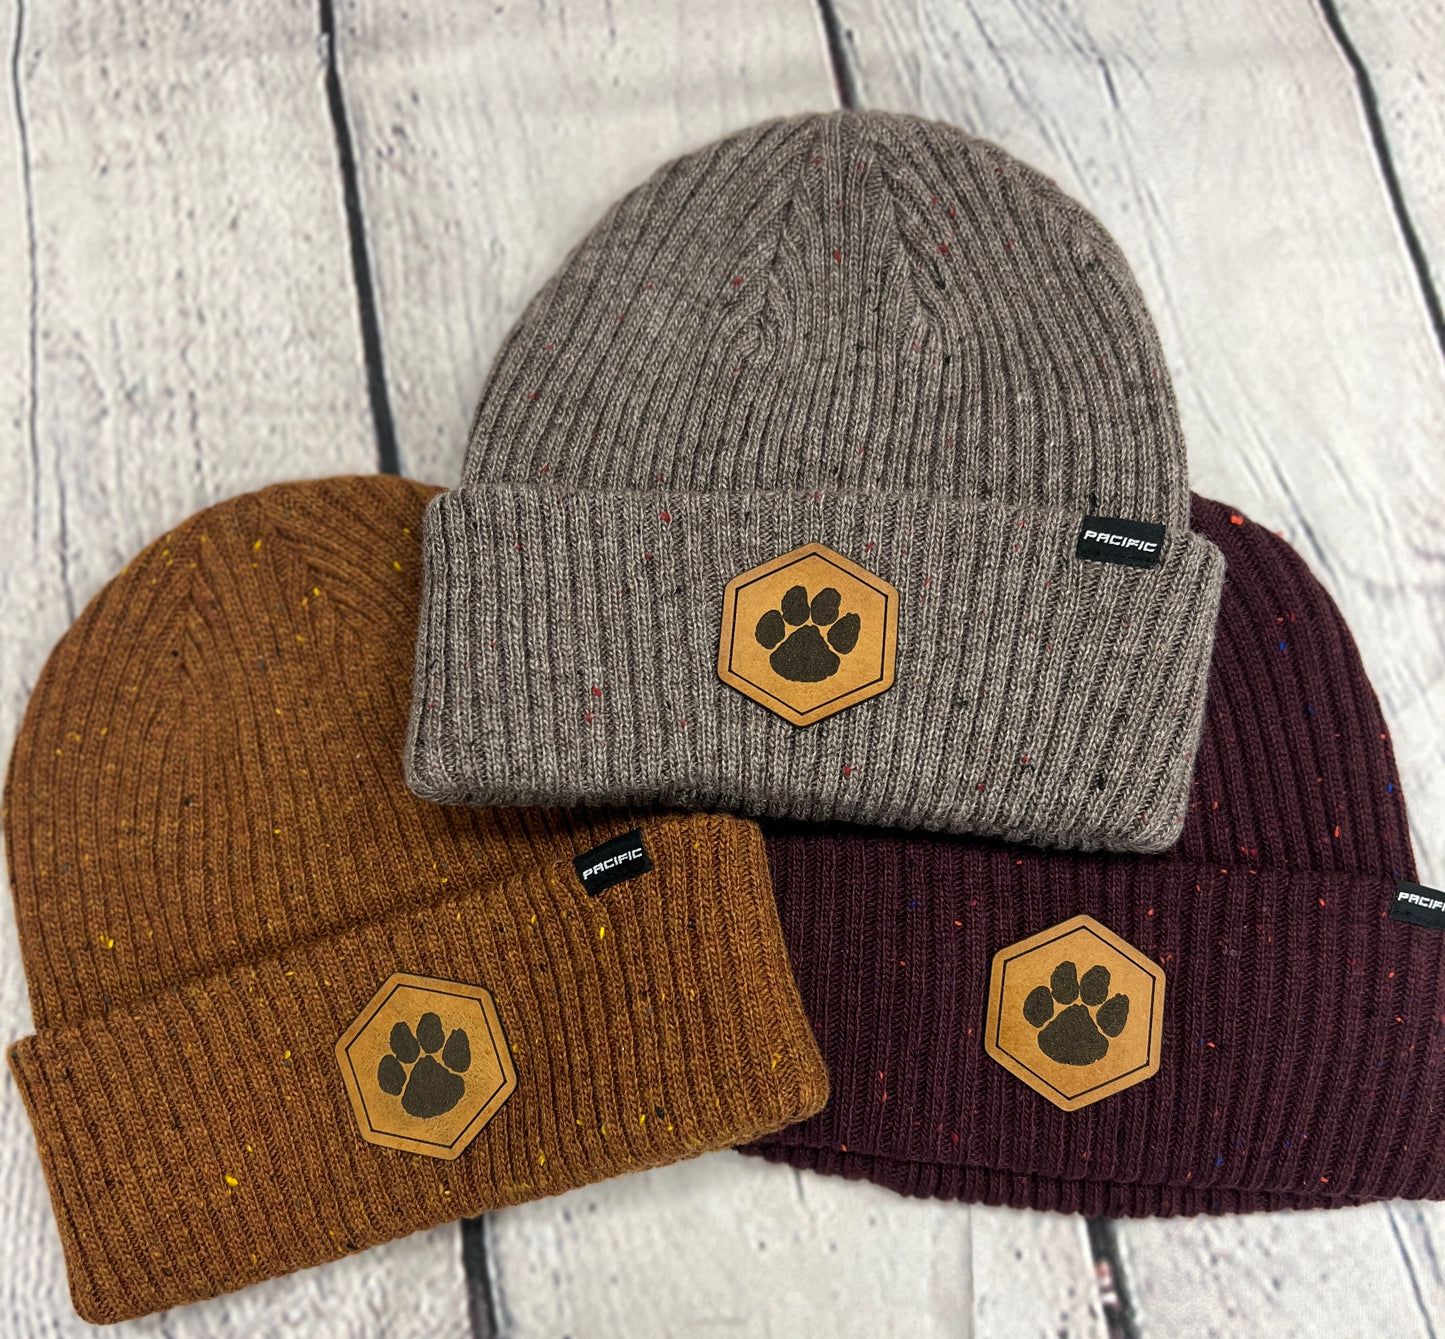 Wildcat paw speckled beanies